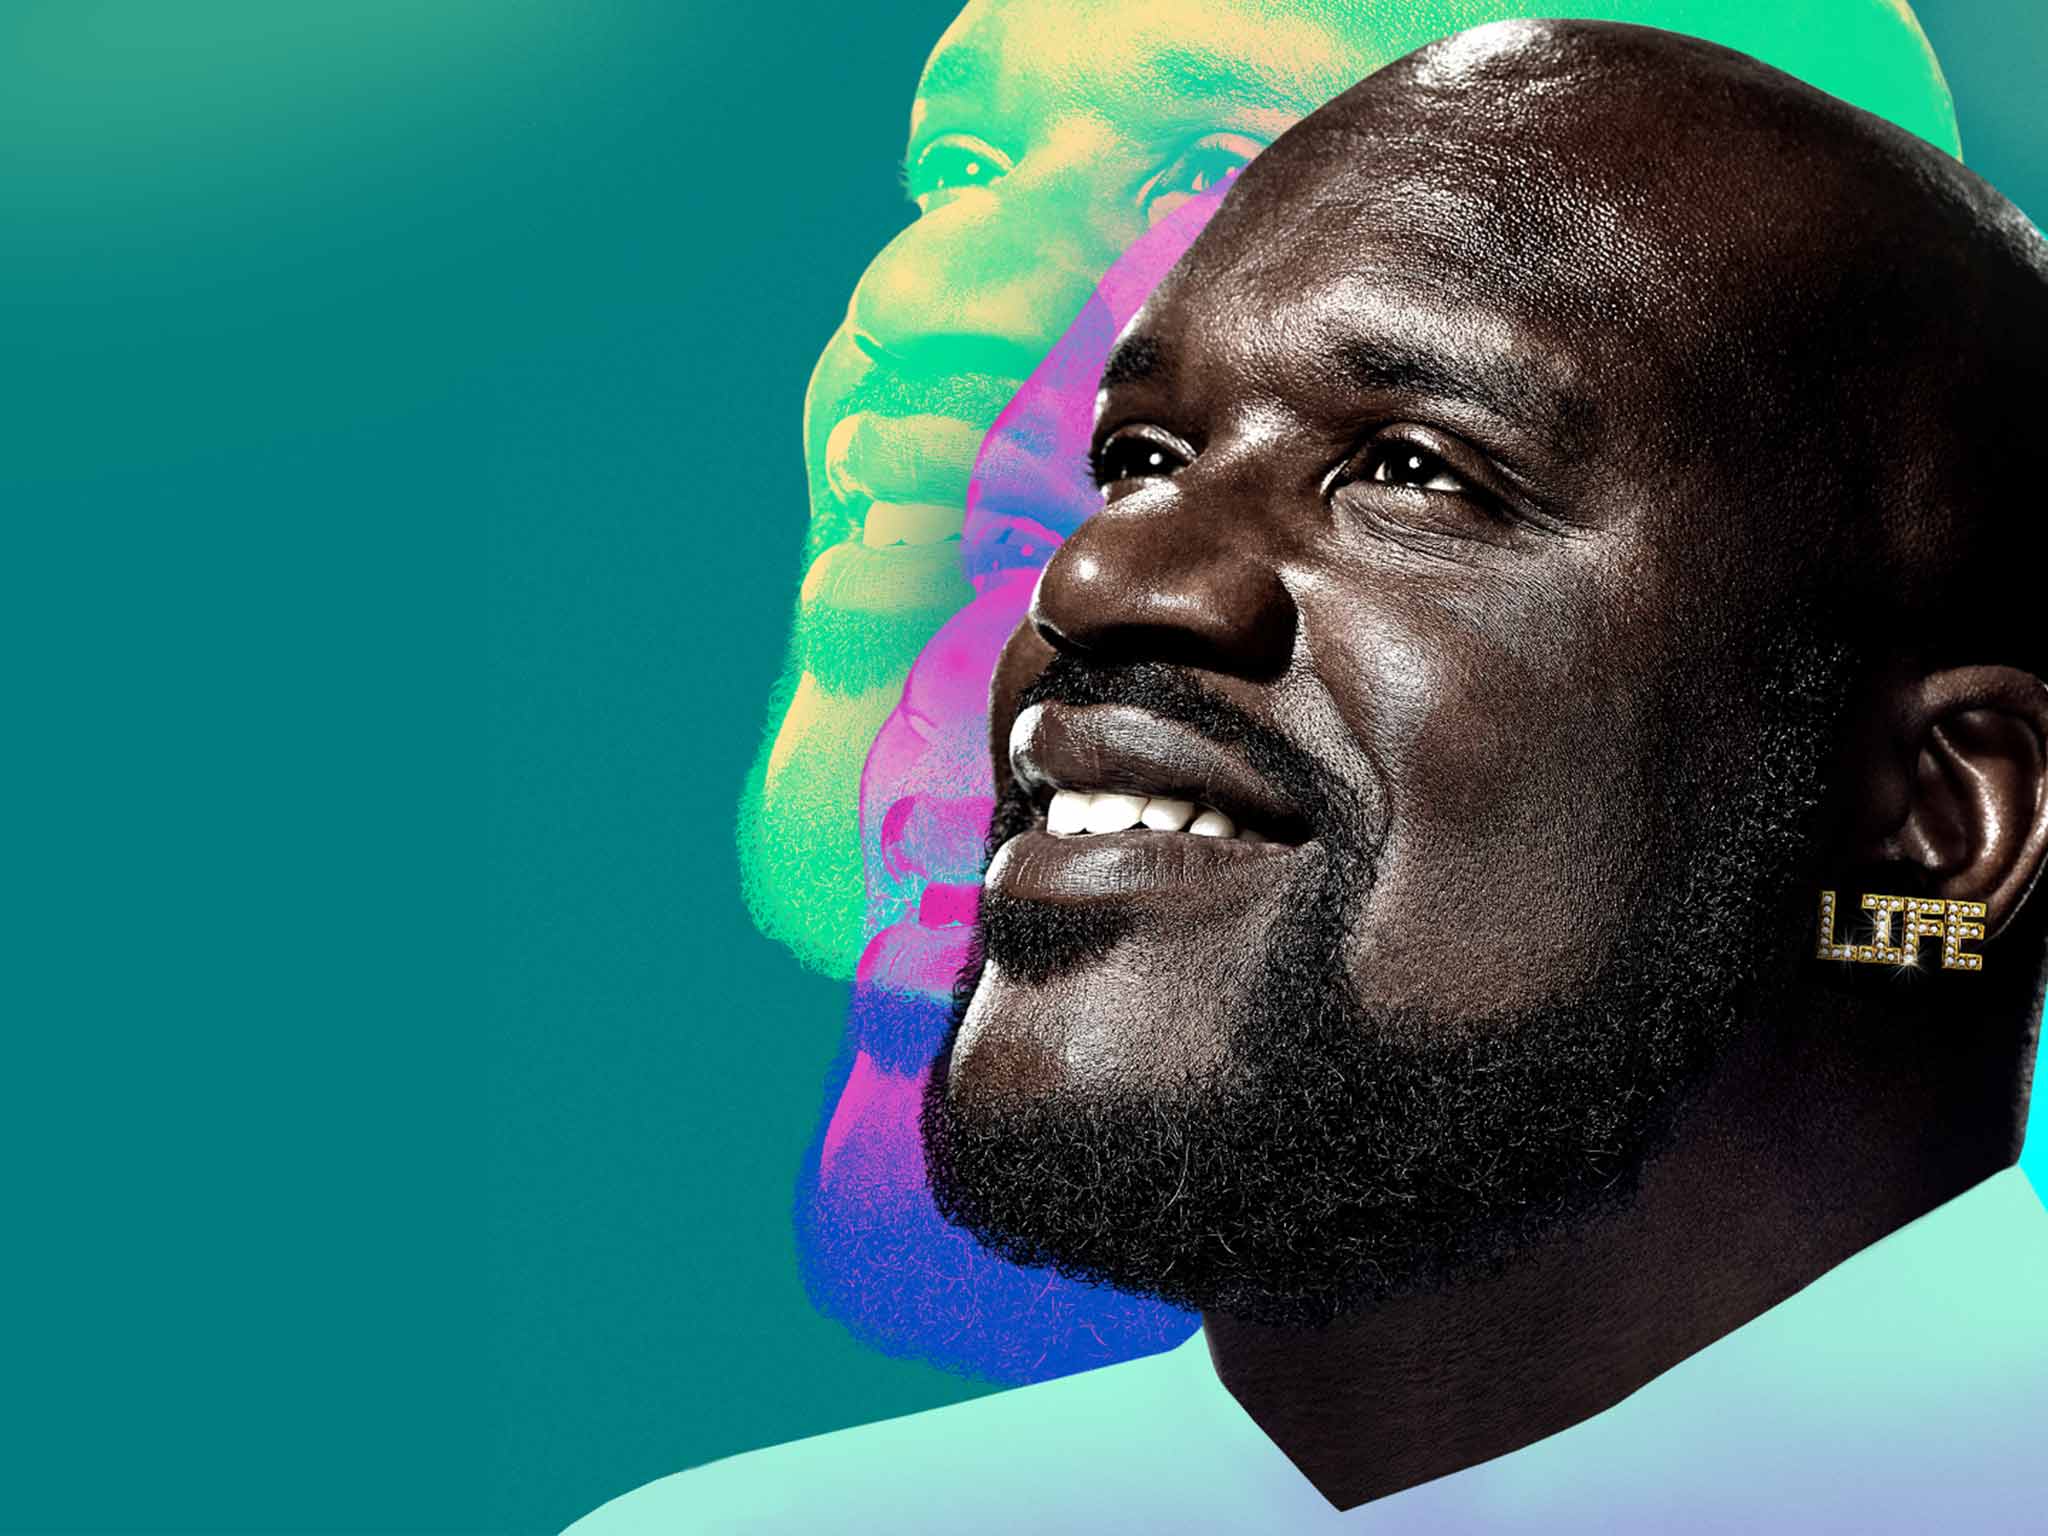 <p><strong>Shaquille O’Neal’s provides earnest advise on ‘The Big Podcast’</strong></p>